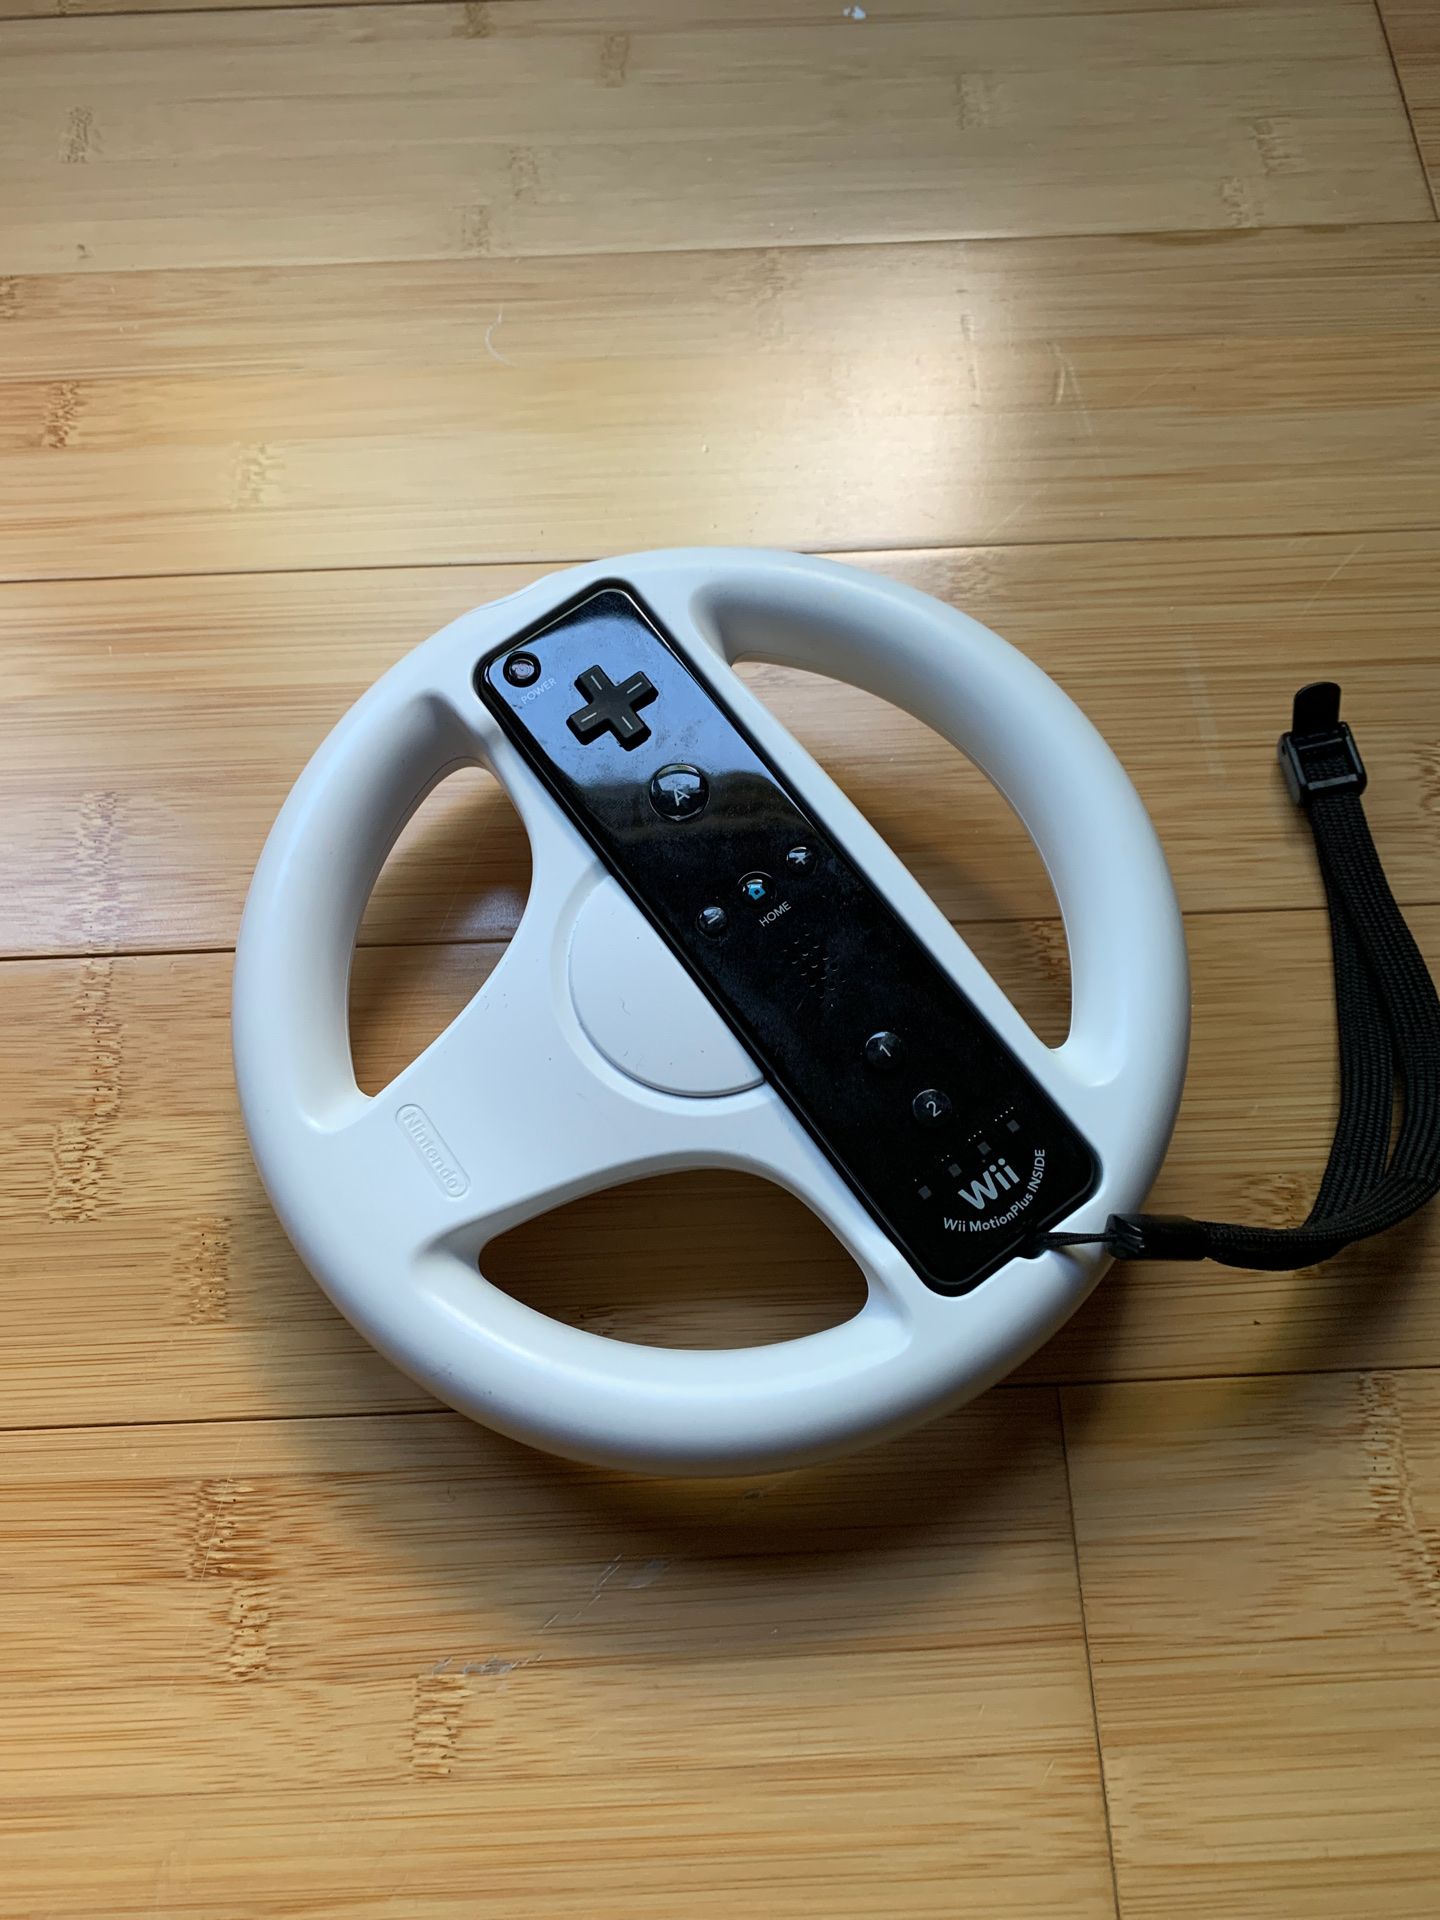 Wii Wheel with Wii Controller